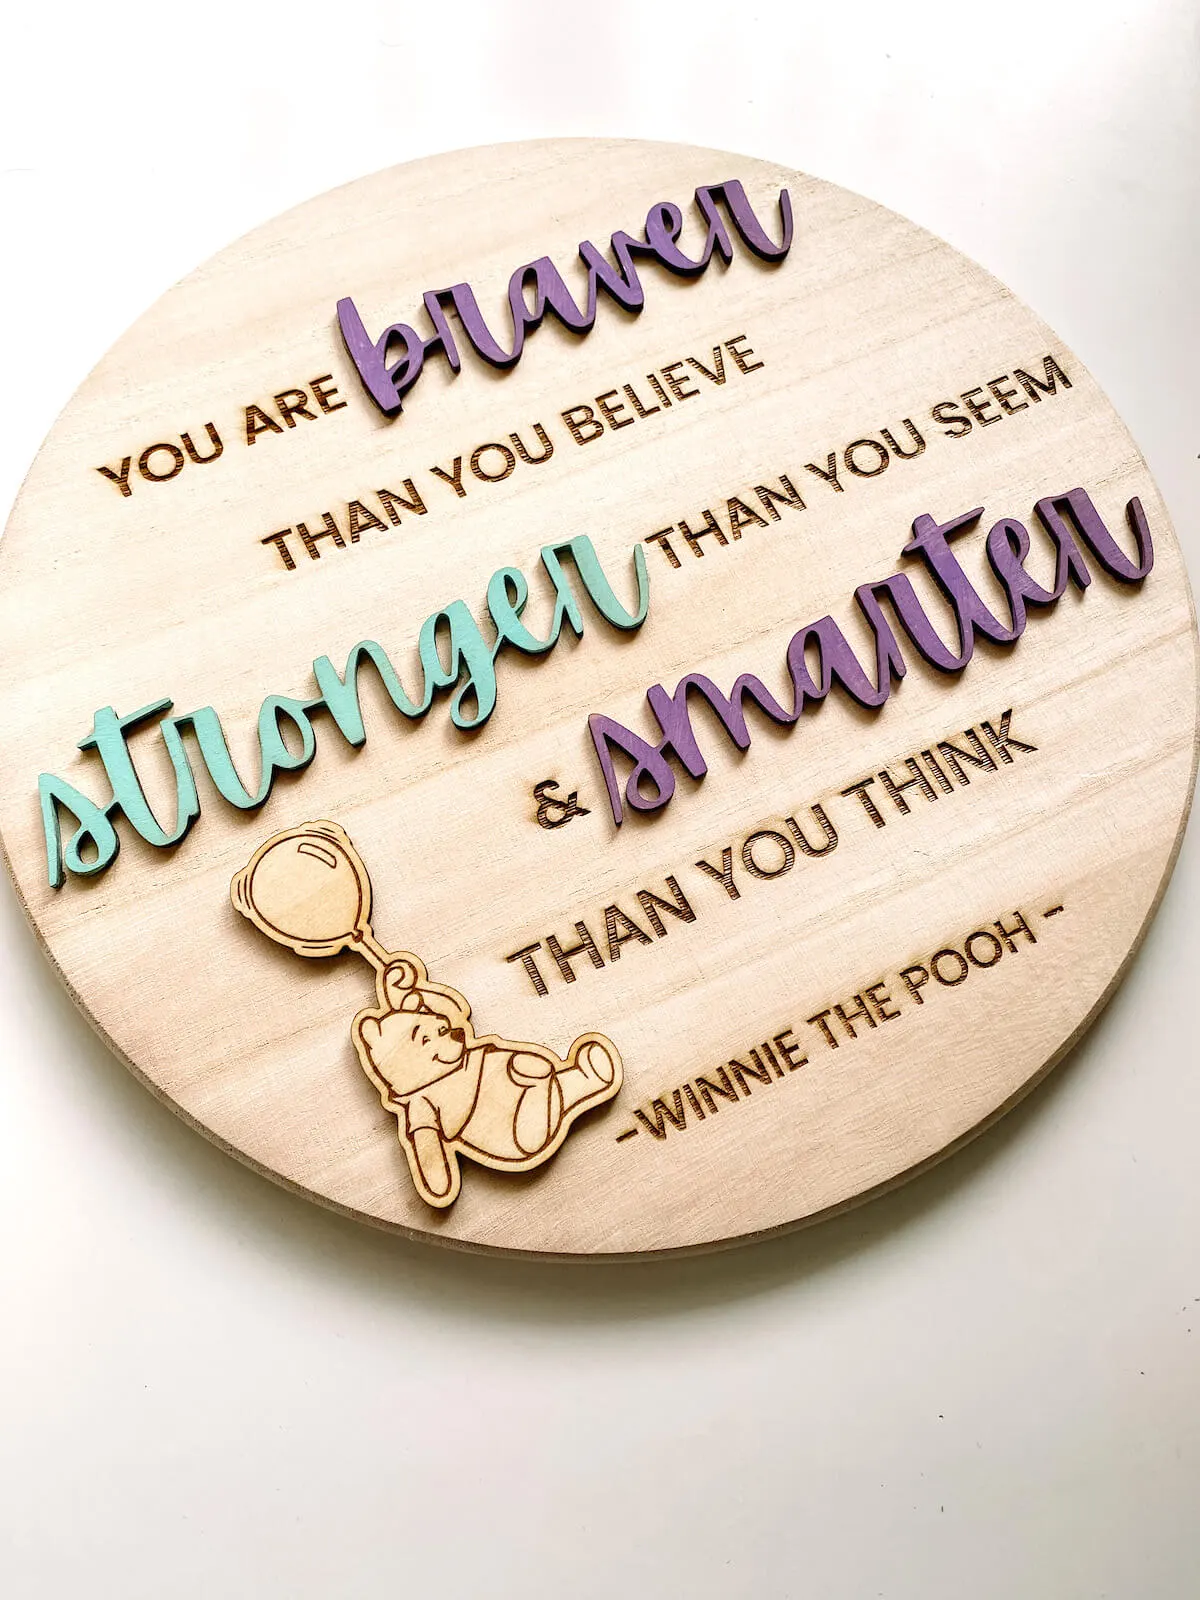 Winnie the pooh quote wooden sign with laser cut words and engraved words